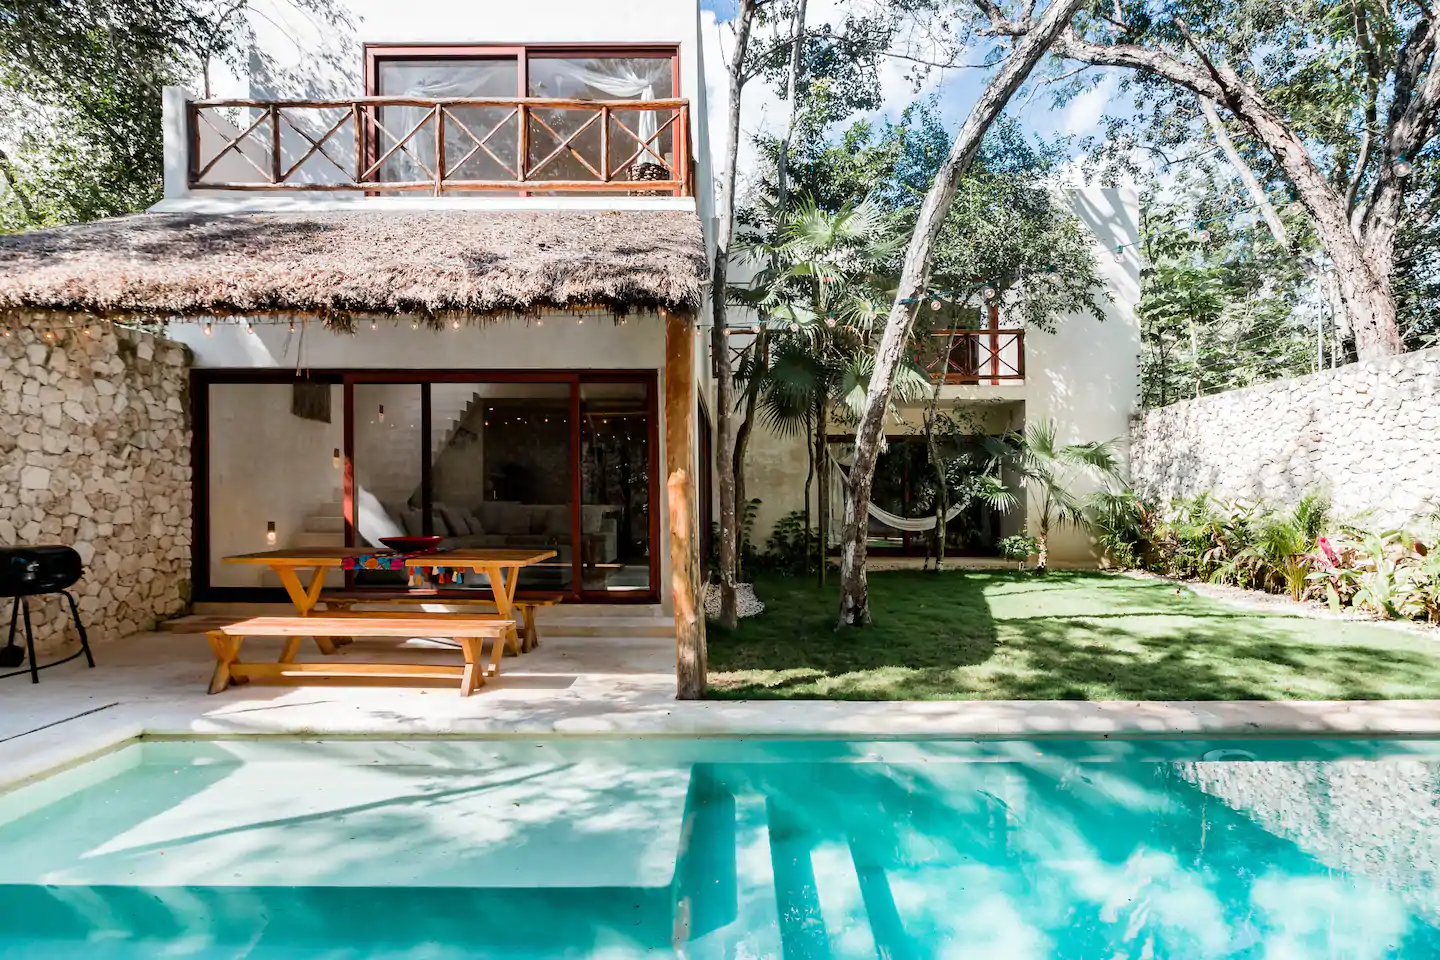 This is one of the best Airbnb resorts in Tulum.